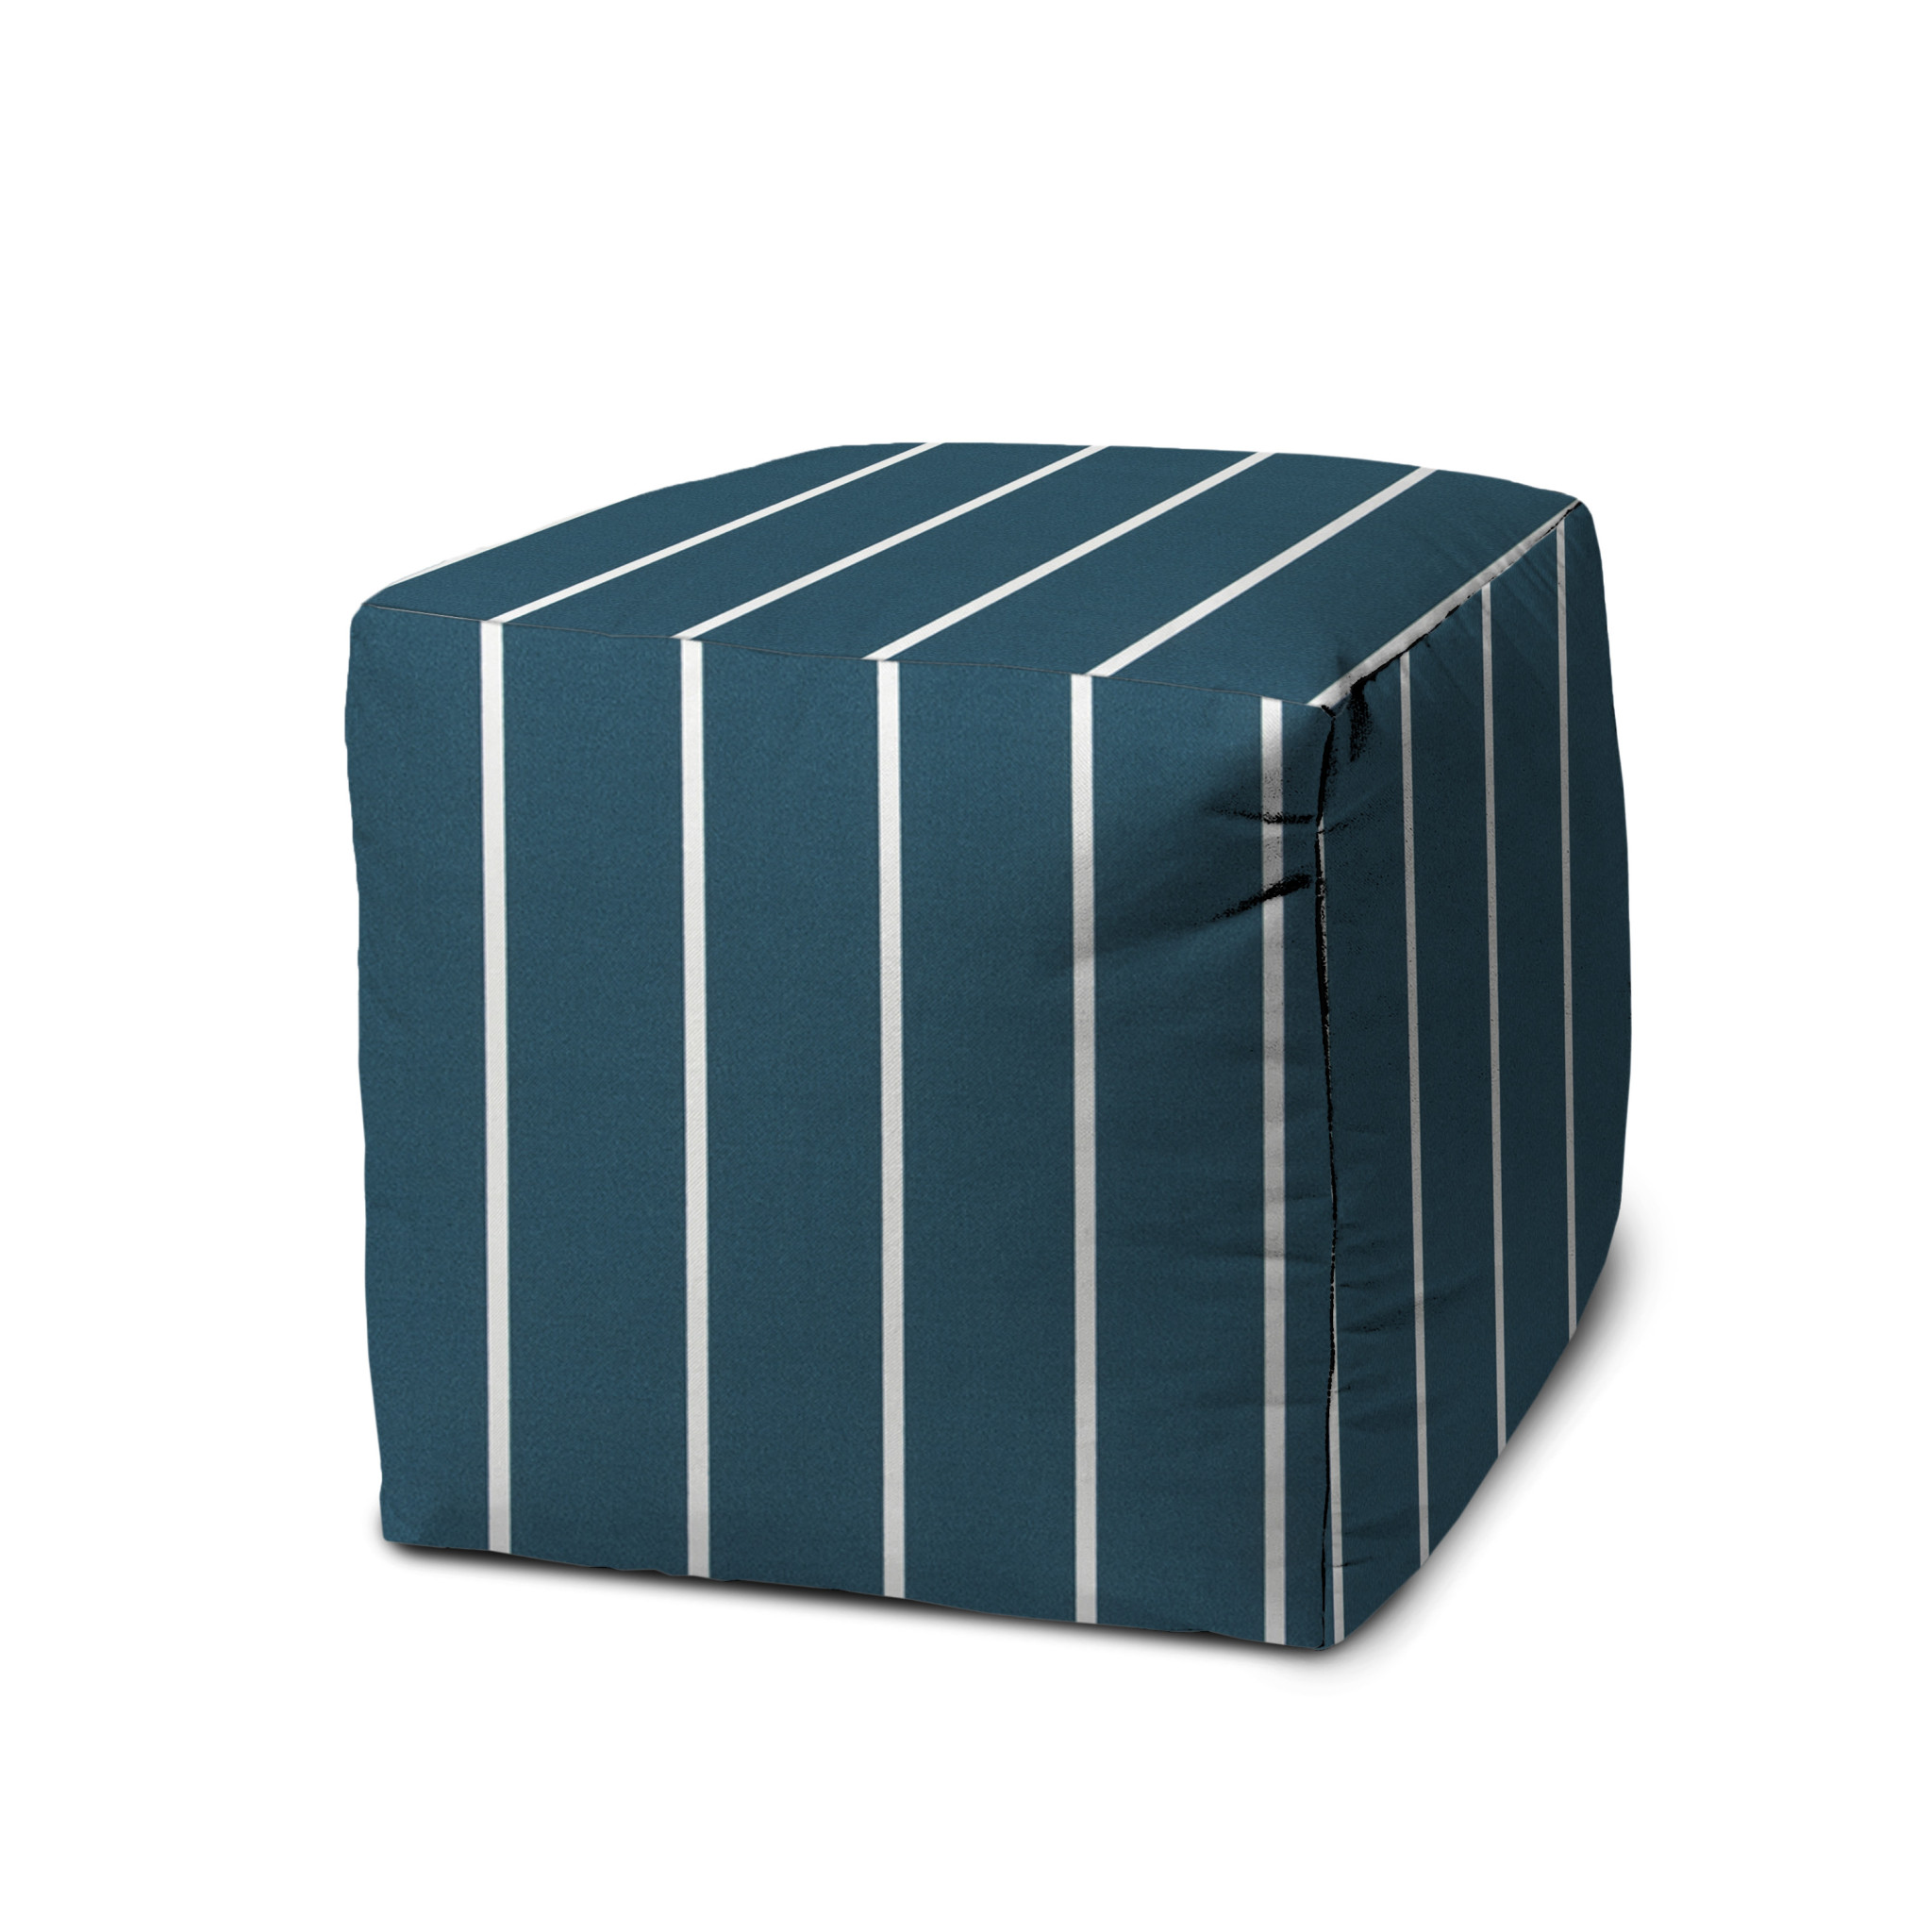 17" Turquoise Cube Striped Indoor Outdoor Pouf Cover-475406-1